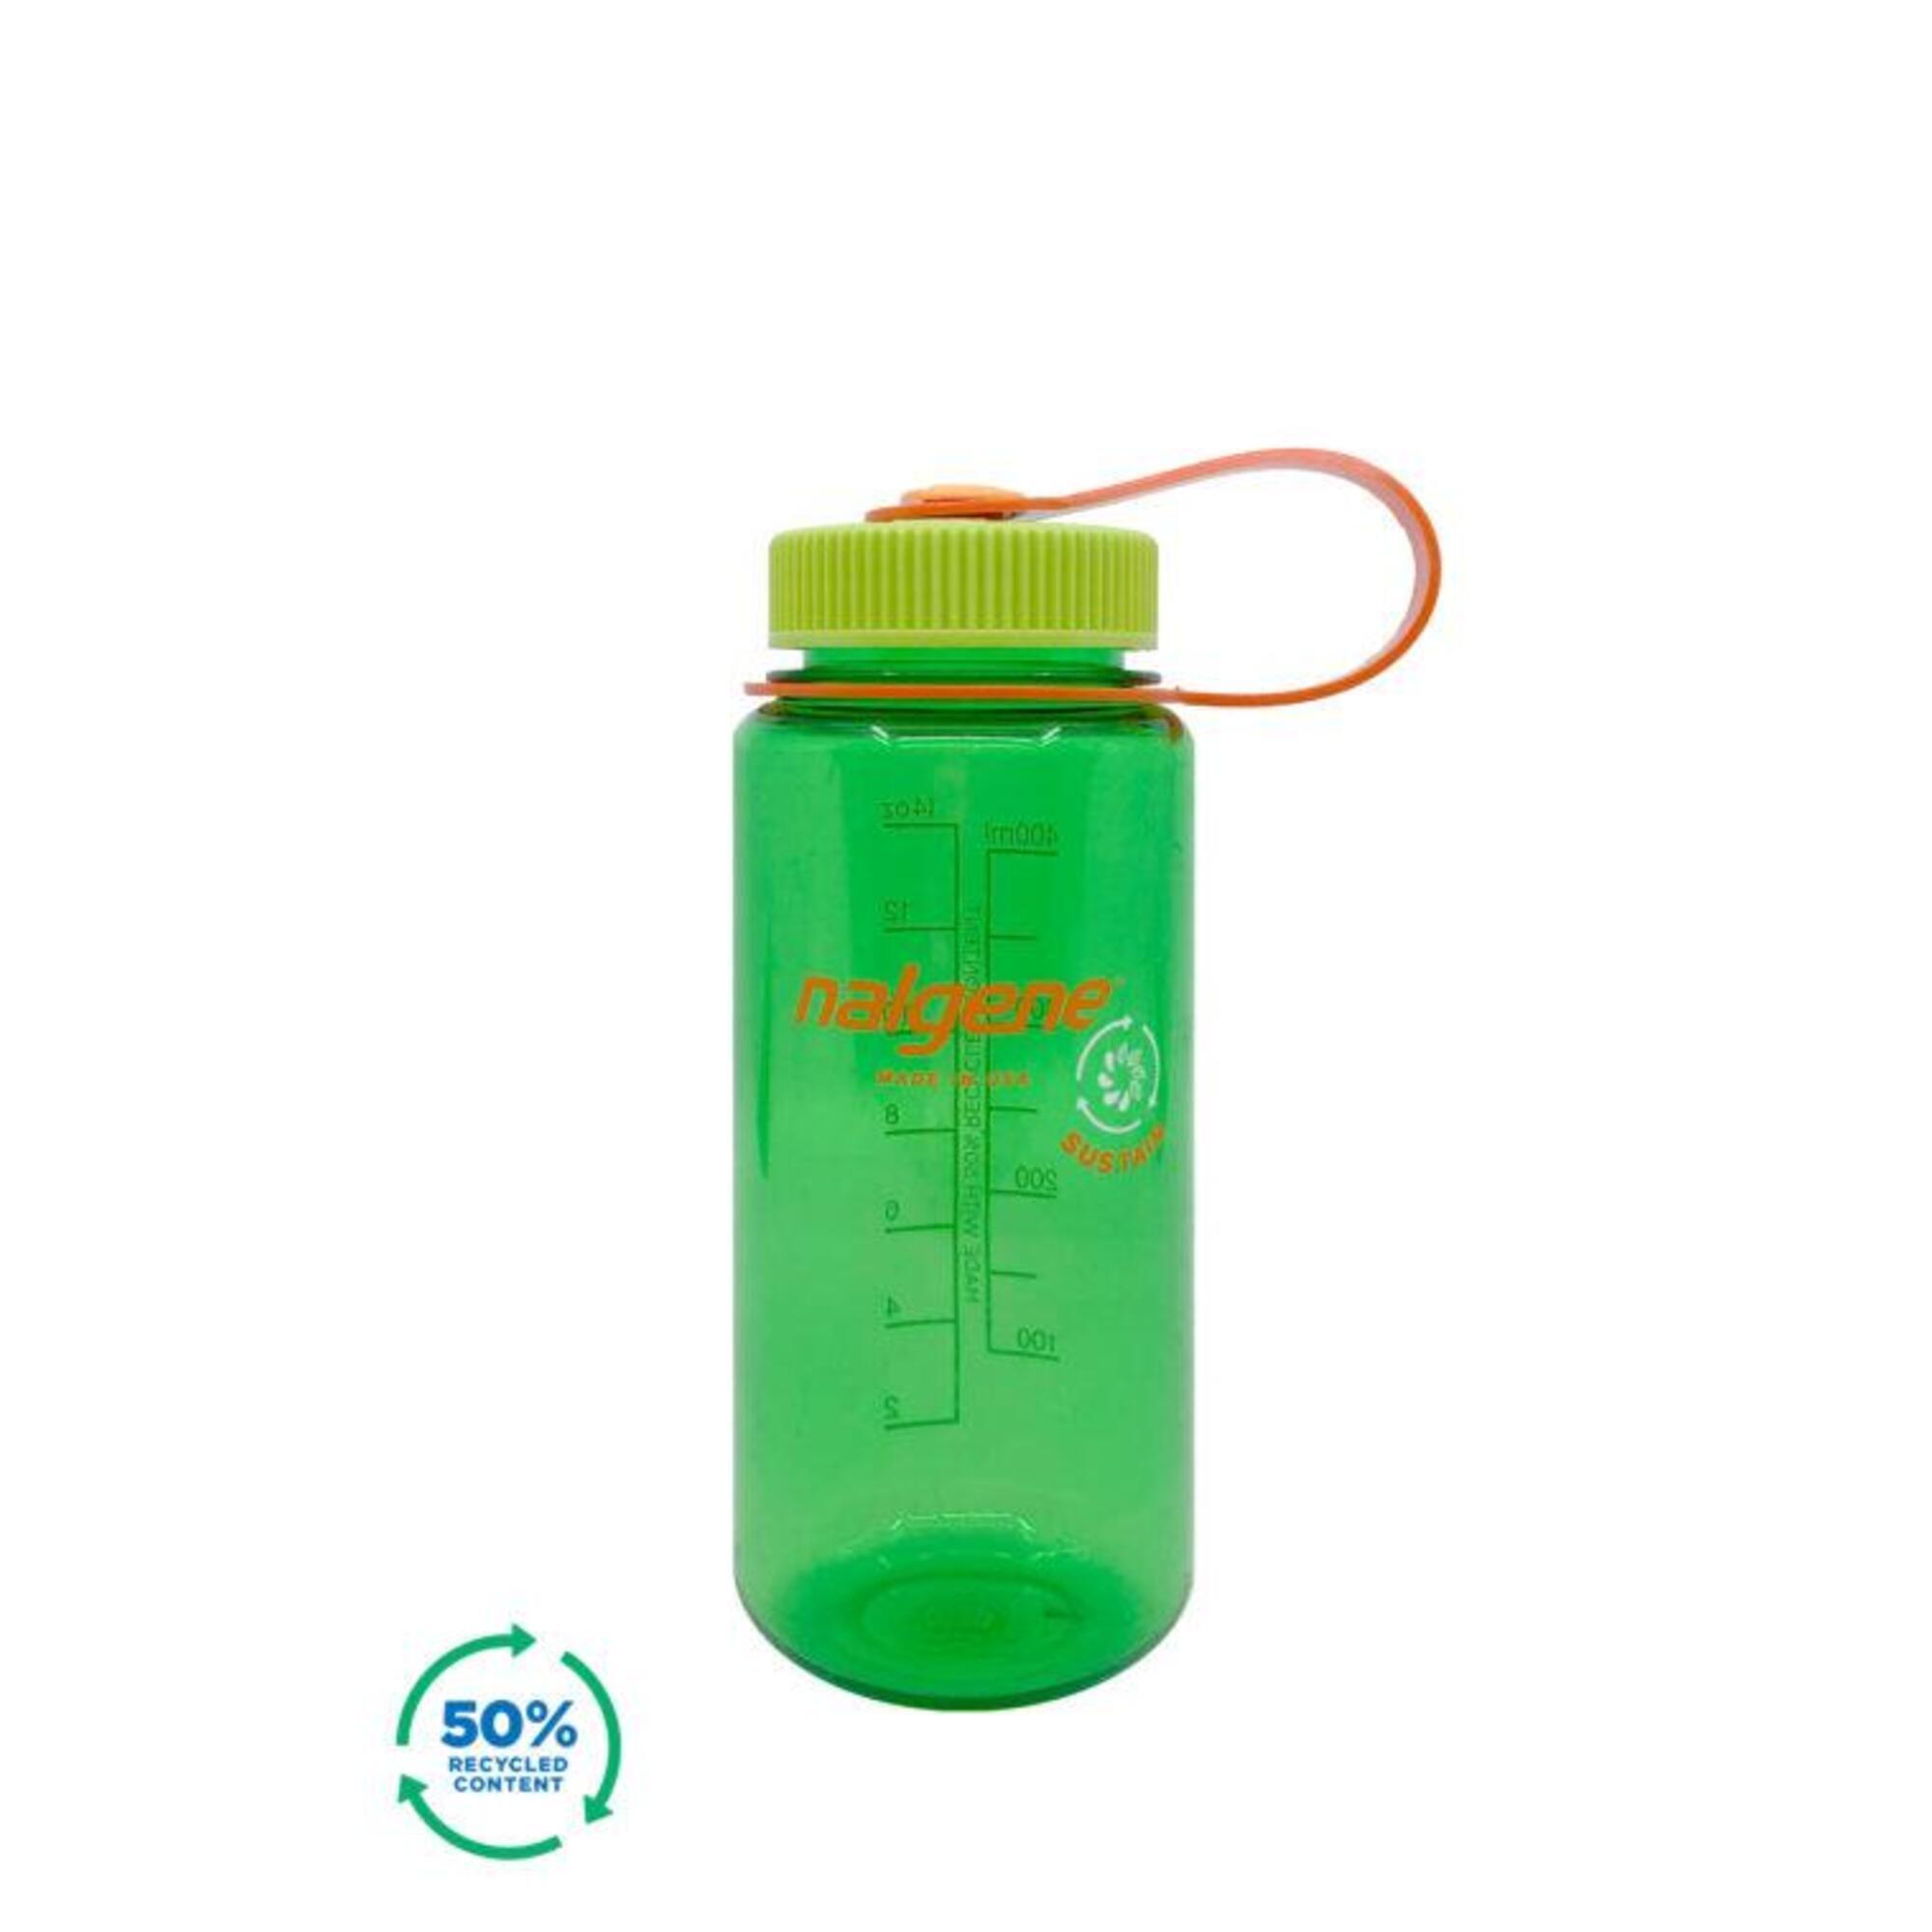 NALGENE 1L Wide Mouth Sustain Water Bottle - Made From 50% Plastic Waste - Emerald Green